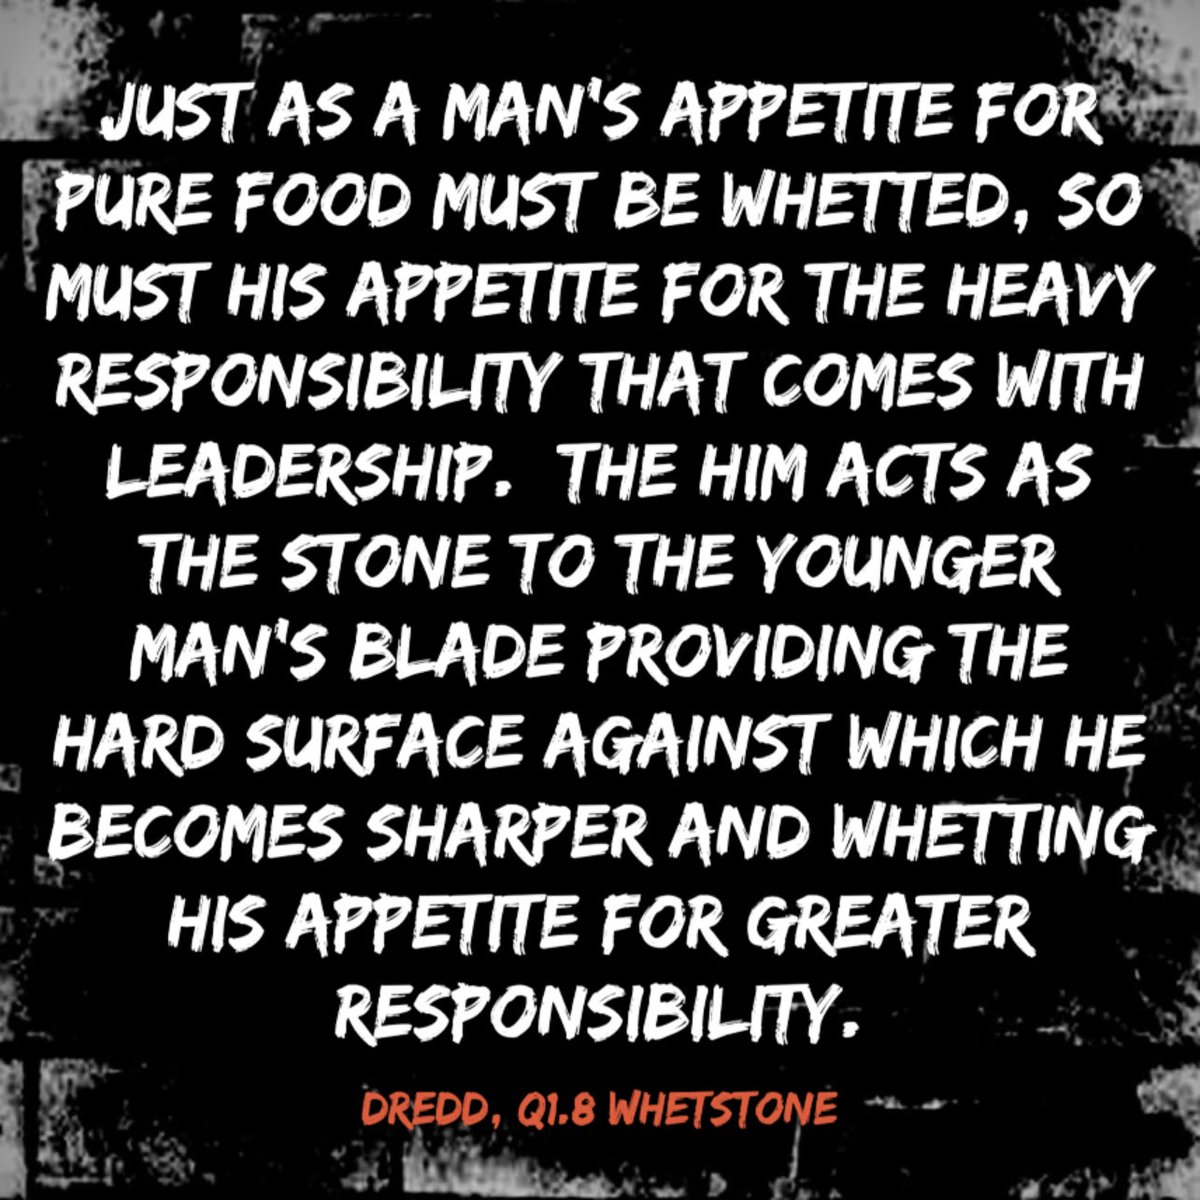 Q1.8 #Whetstone - the vertical relationship between men. ▪️A man must be sharpened like a knife. ▪️Hard looks and straight talk (tempered by love) gets results. ▪️The Whetstone is necessary for both the Blade and the Stone to Get Right. Linktr.ee/F3QSOURCE